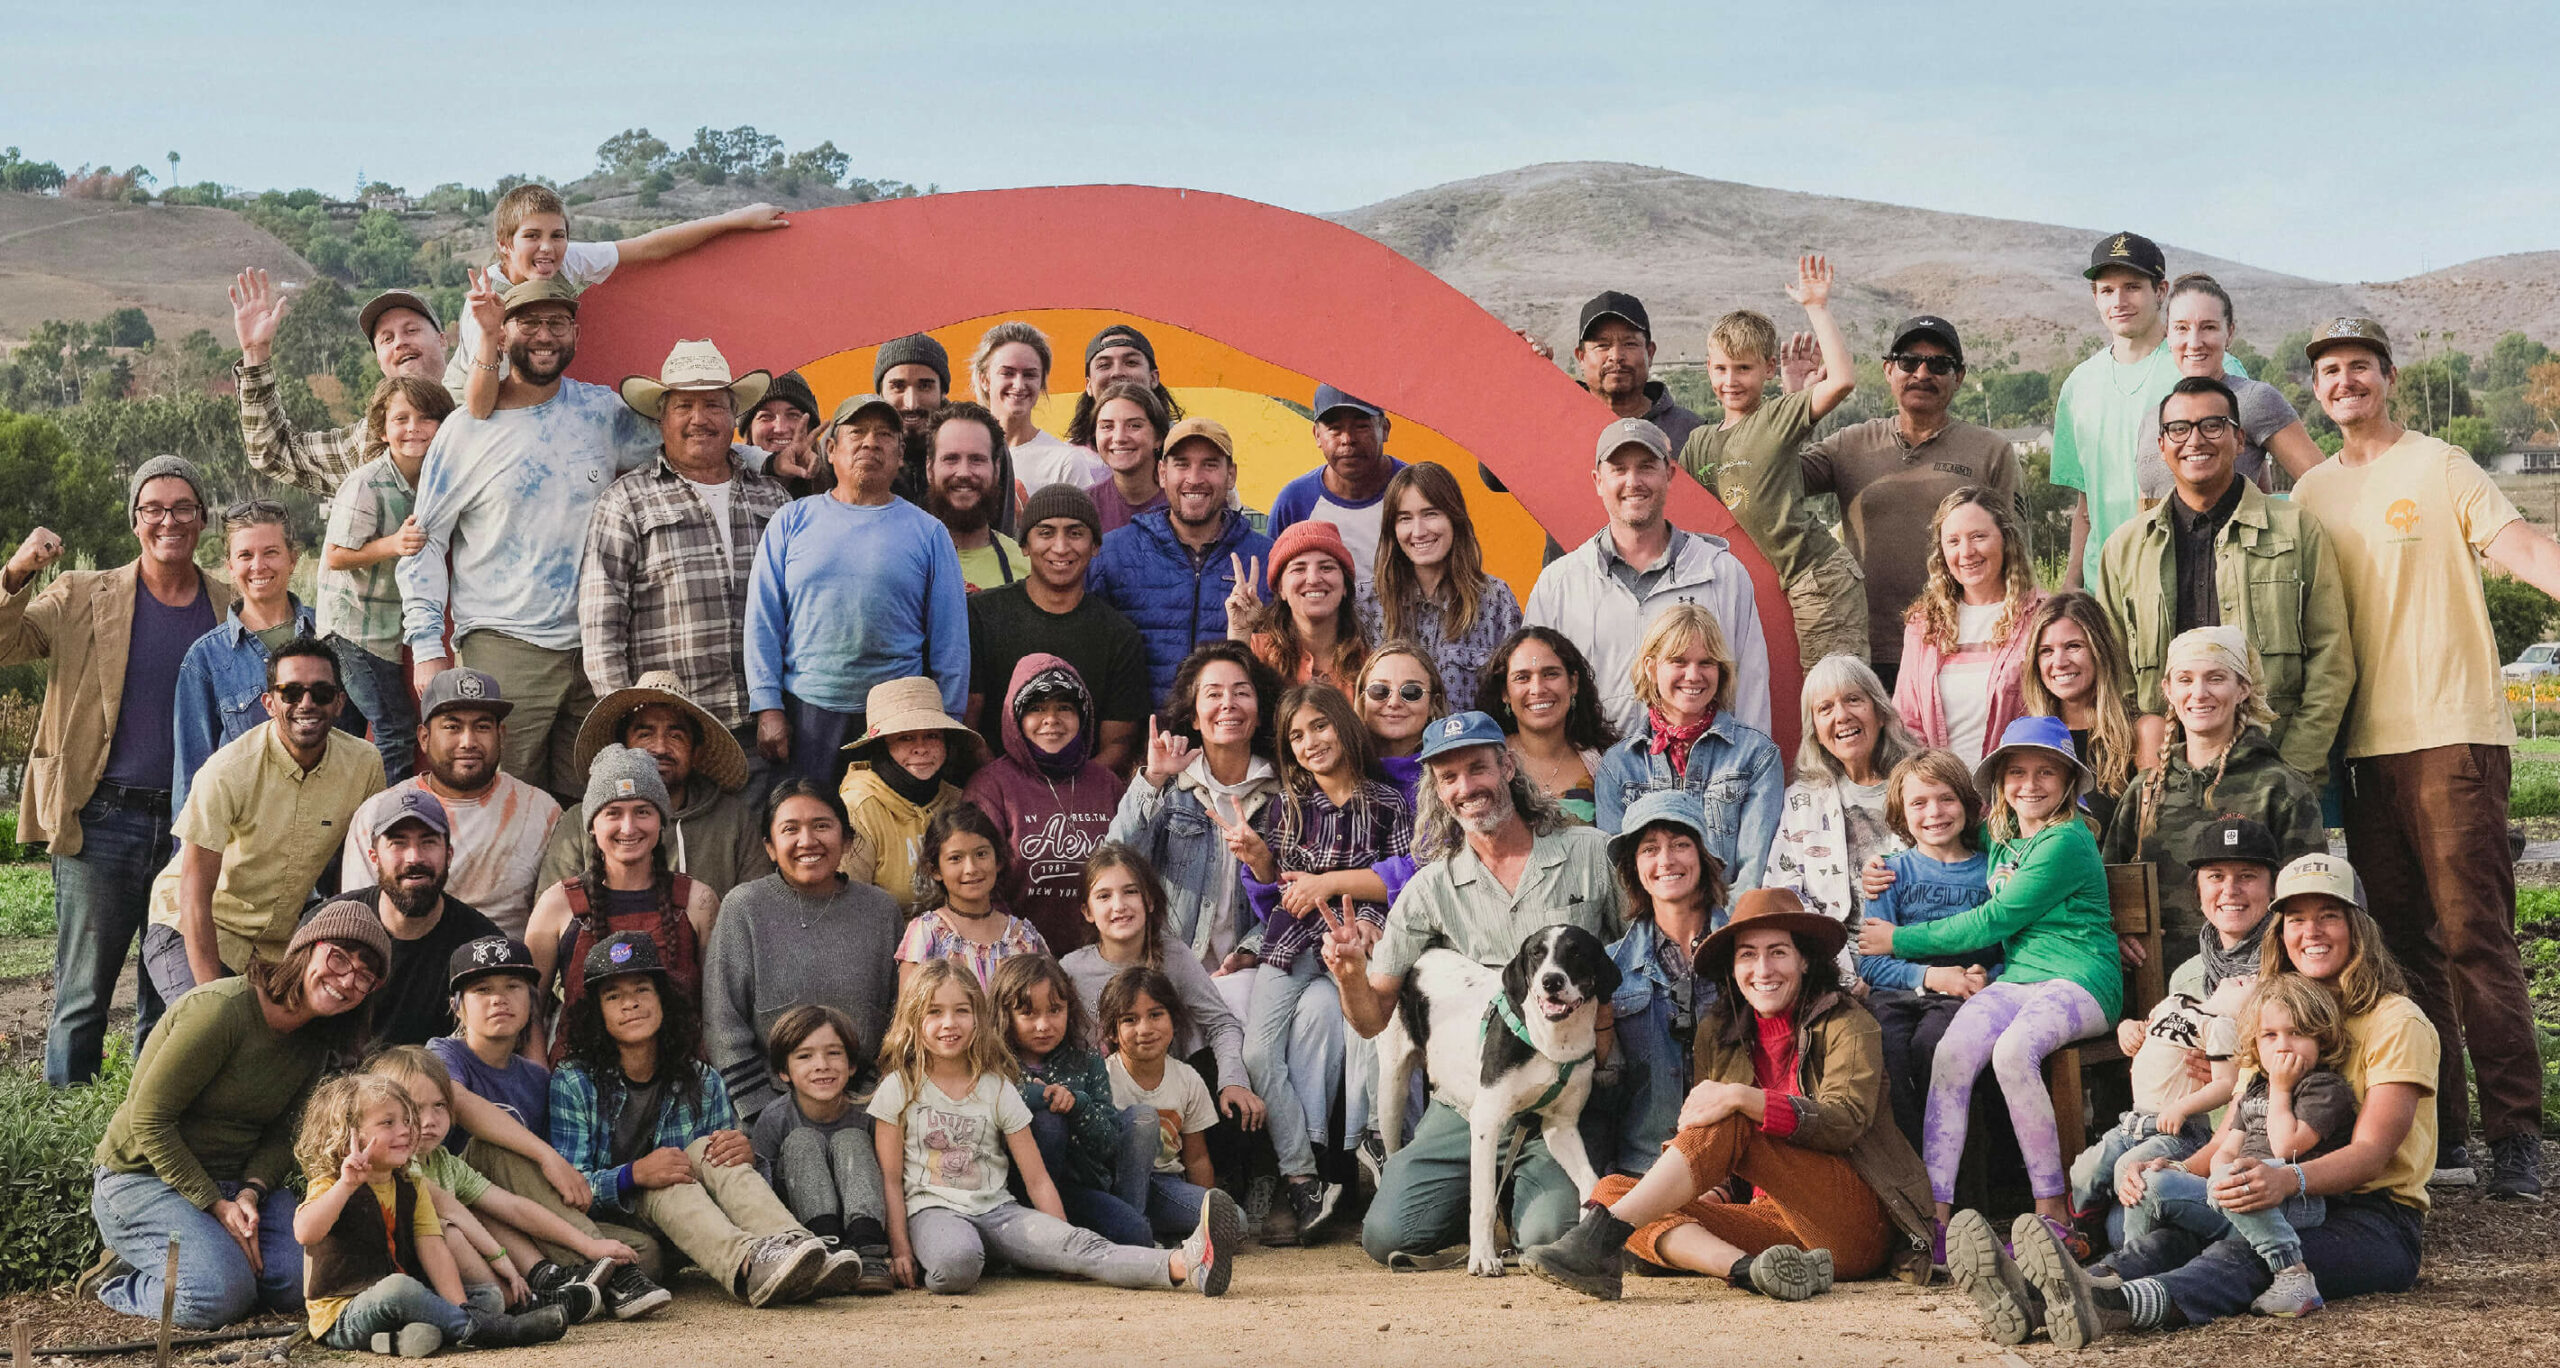 The Ecology Center staff pose in front of the rainbow on the farm.